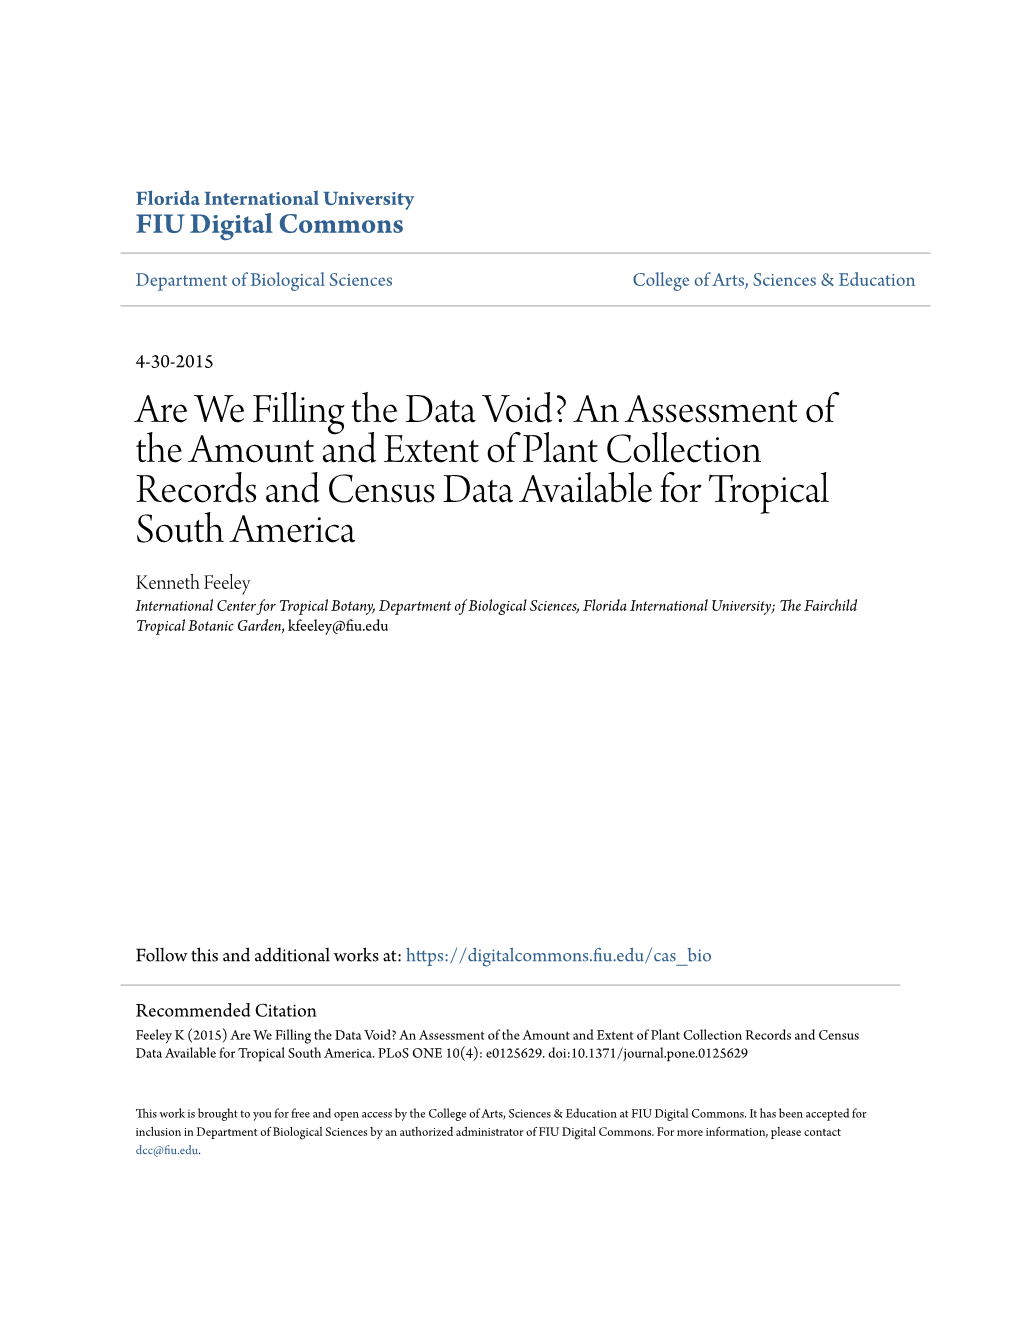 Are We Filling the Data Void? an Assessment of the Amount and Extent of Plant Collection Records and Census Data Available for T